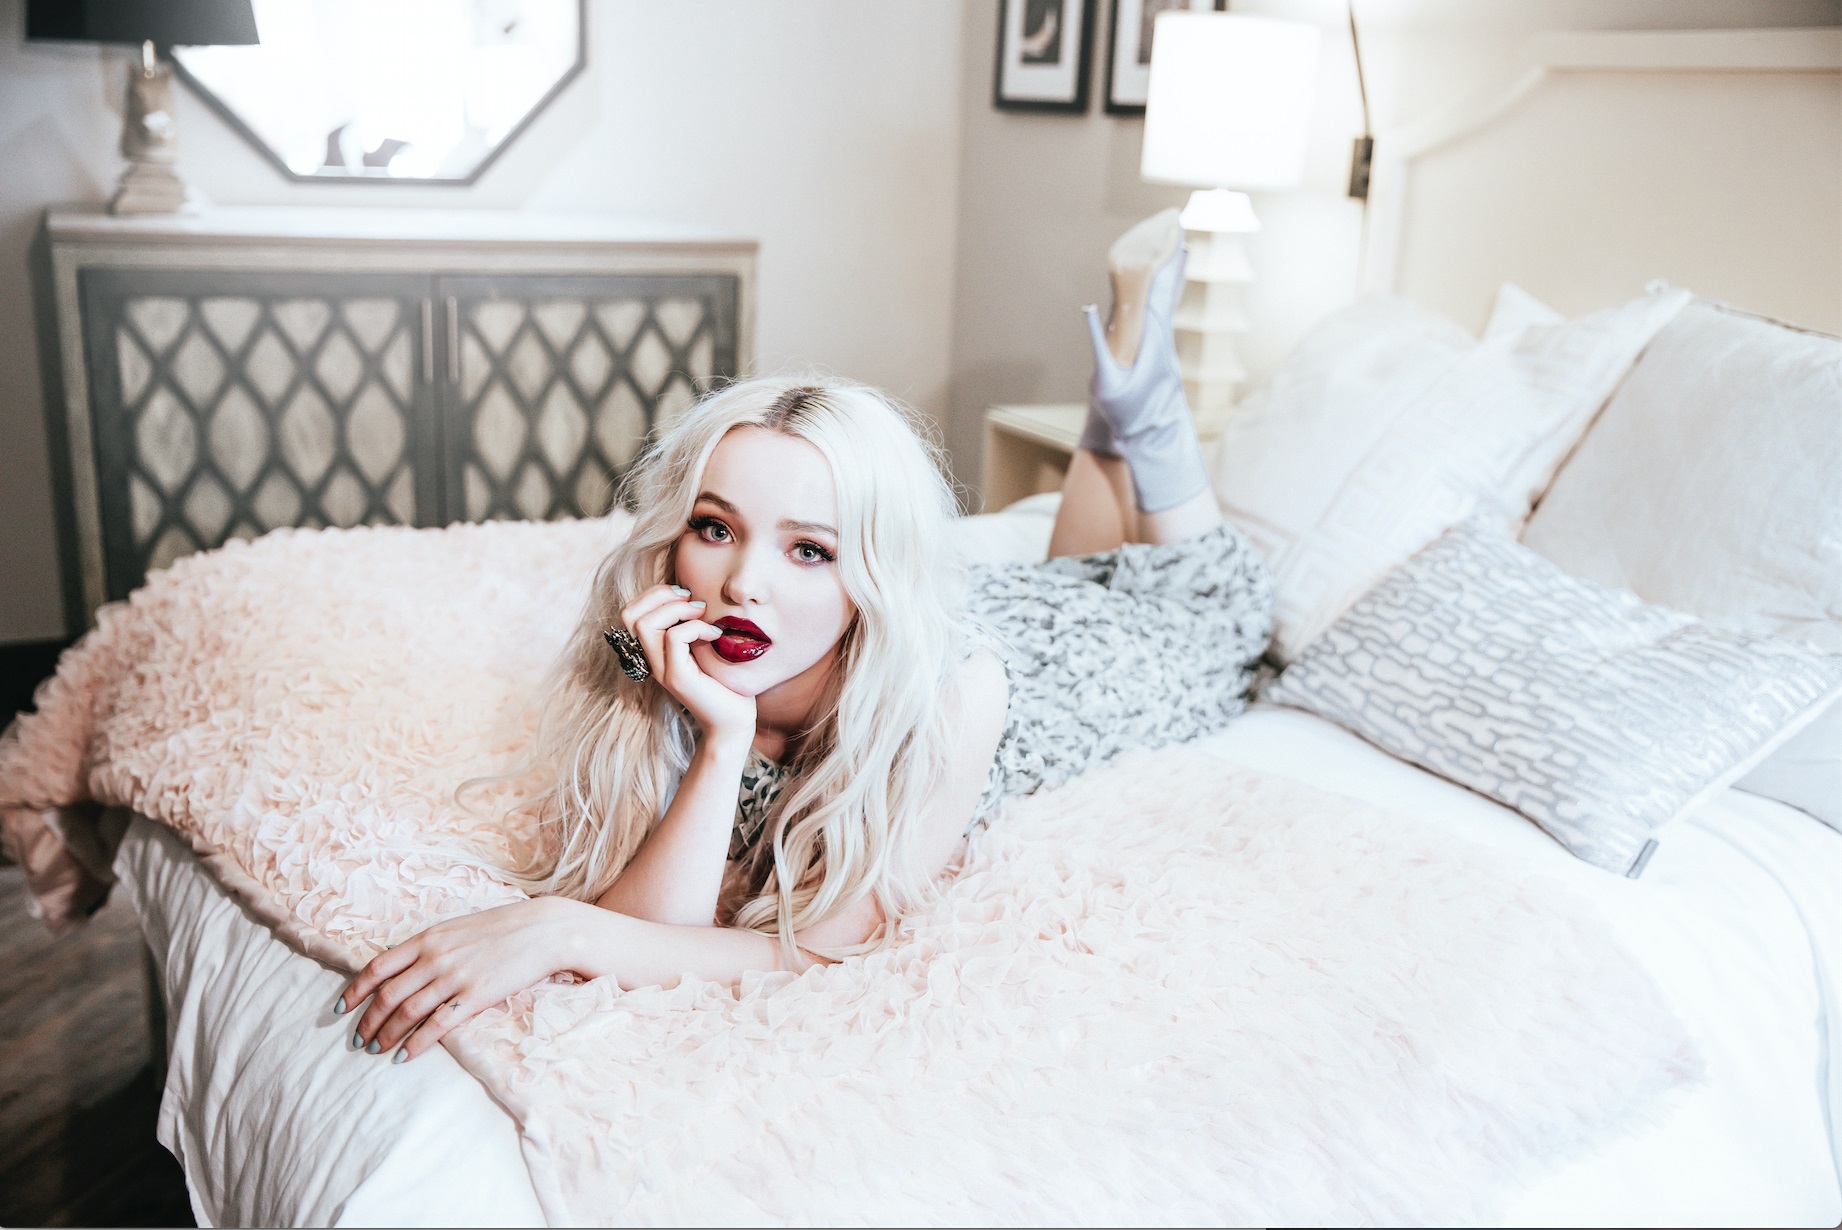 People 1842x1230 Dove Cameron women actress singer blonde lipstick in bed lying on front long hair women indoors green eyes painted nails red lipstick